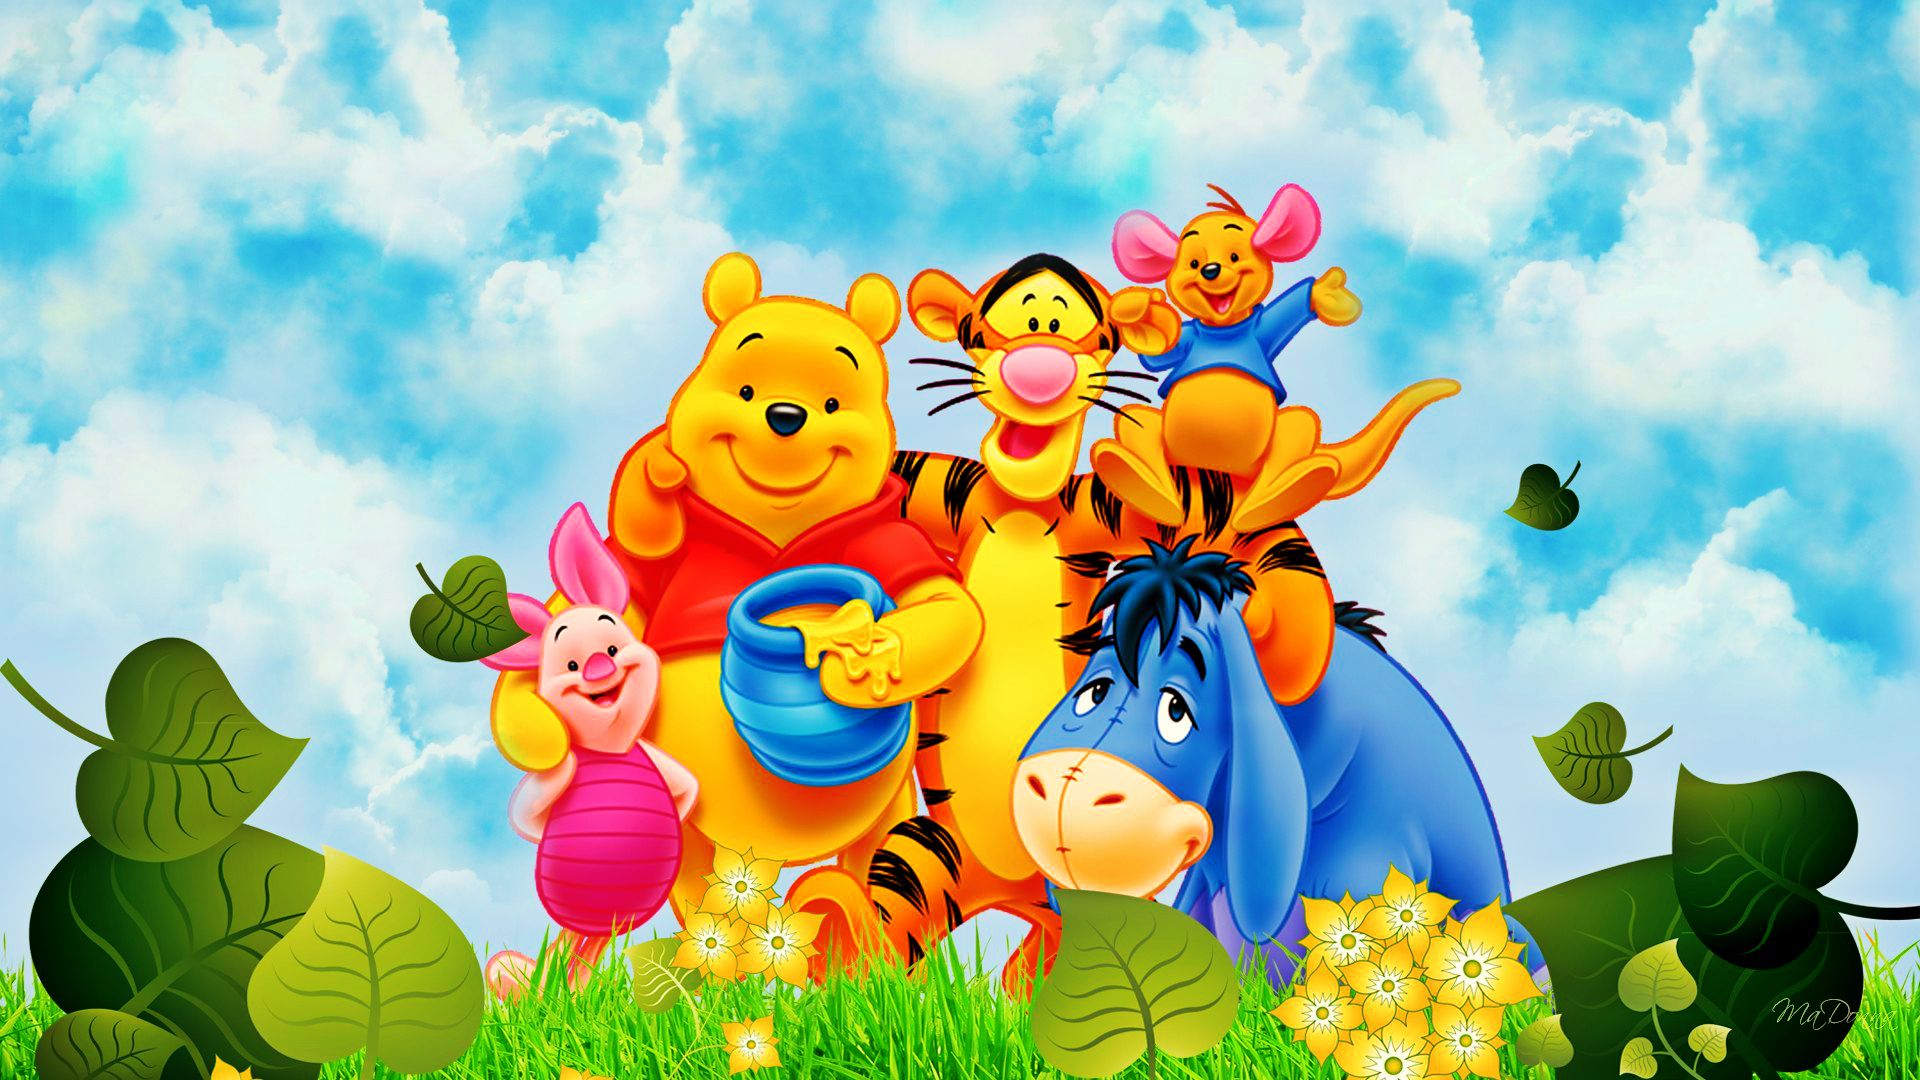 Winnie the Pooh Friendship Quotes Wallpaper   123mobileWallpaperscom